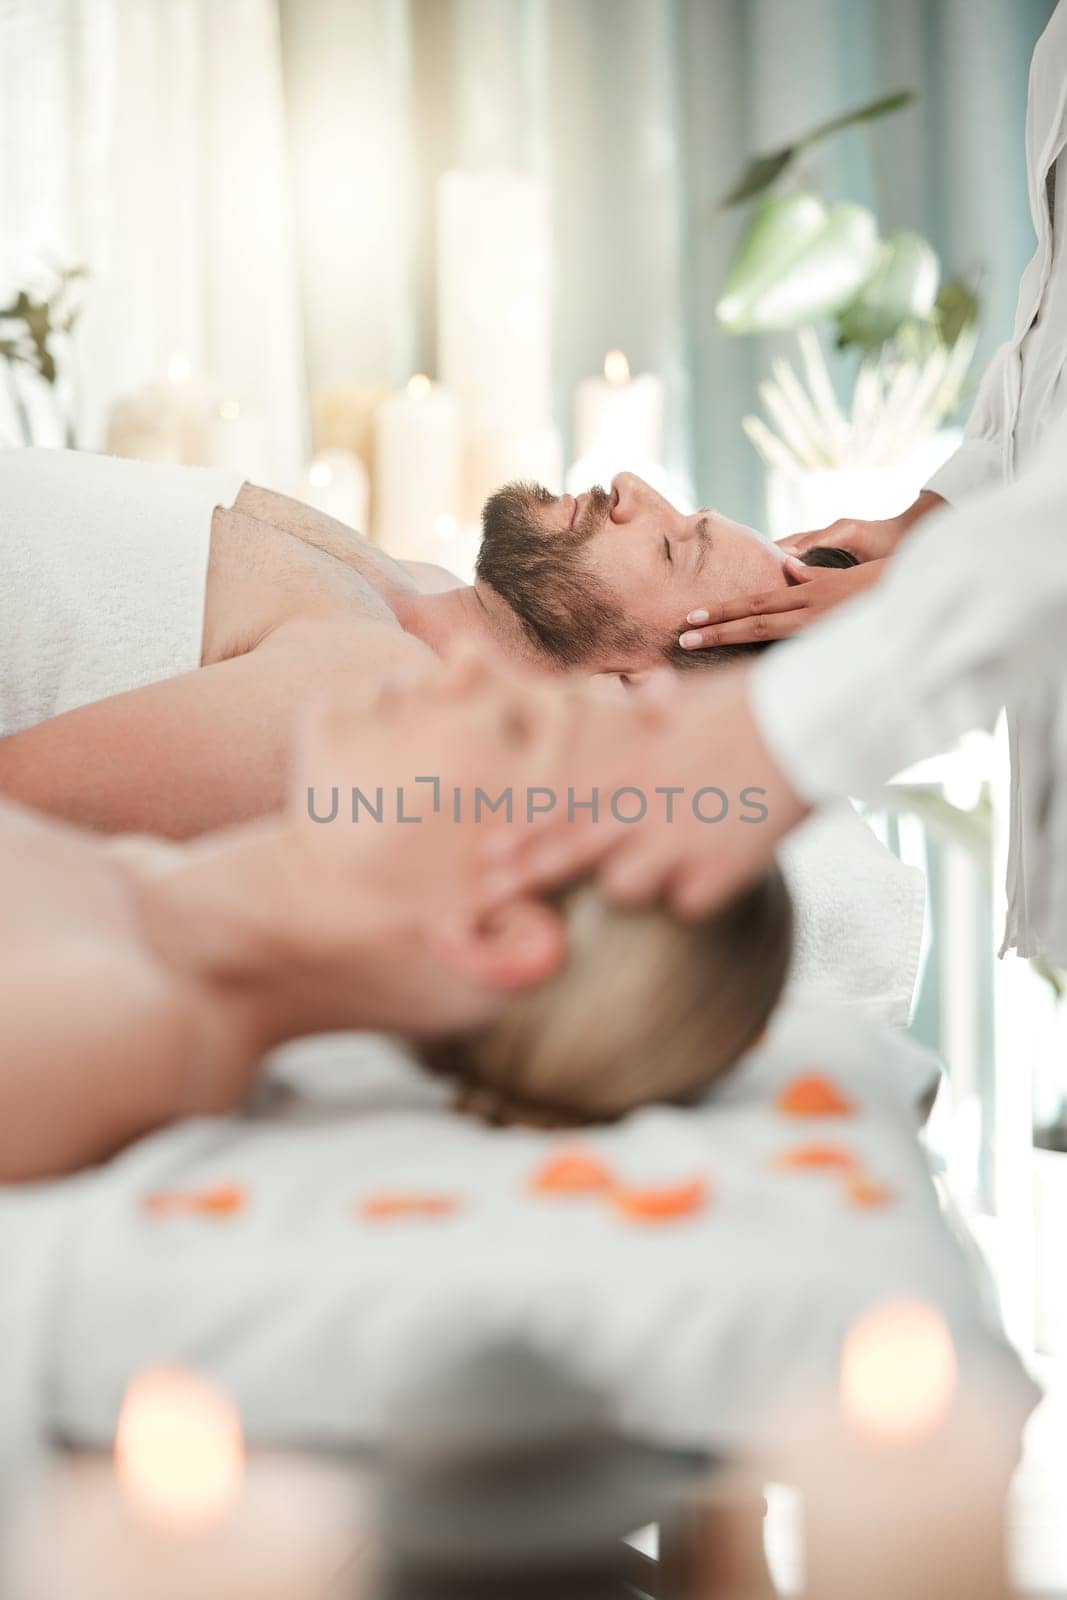 Man, spa and bed for luxury massage to relax, breathe and zen on vacation, holiday or hotel with woman. Couple, mindfulness and love for health at wellness, care and physical therapy for healing.